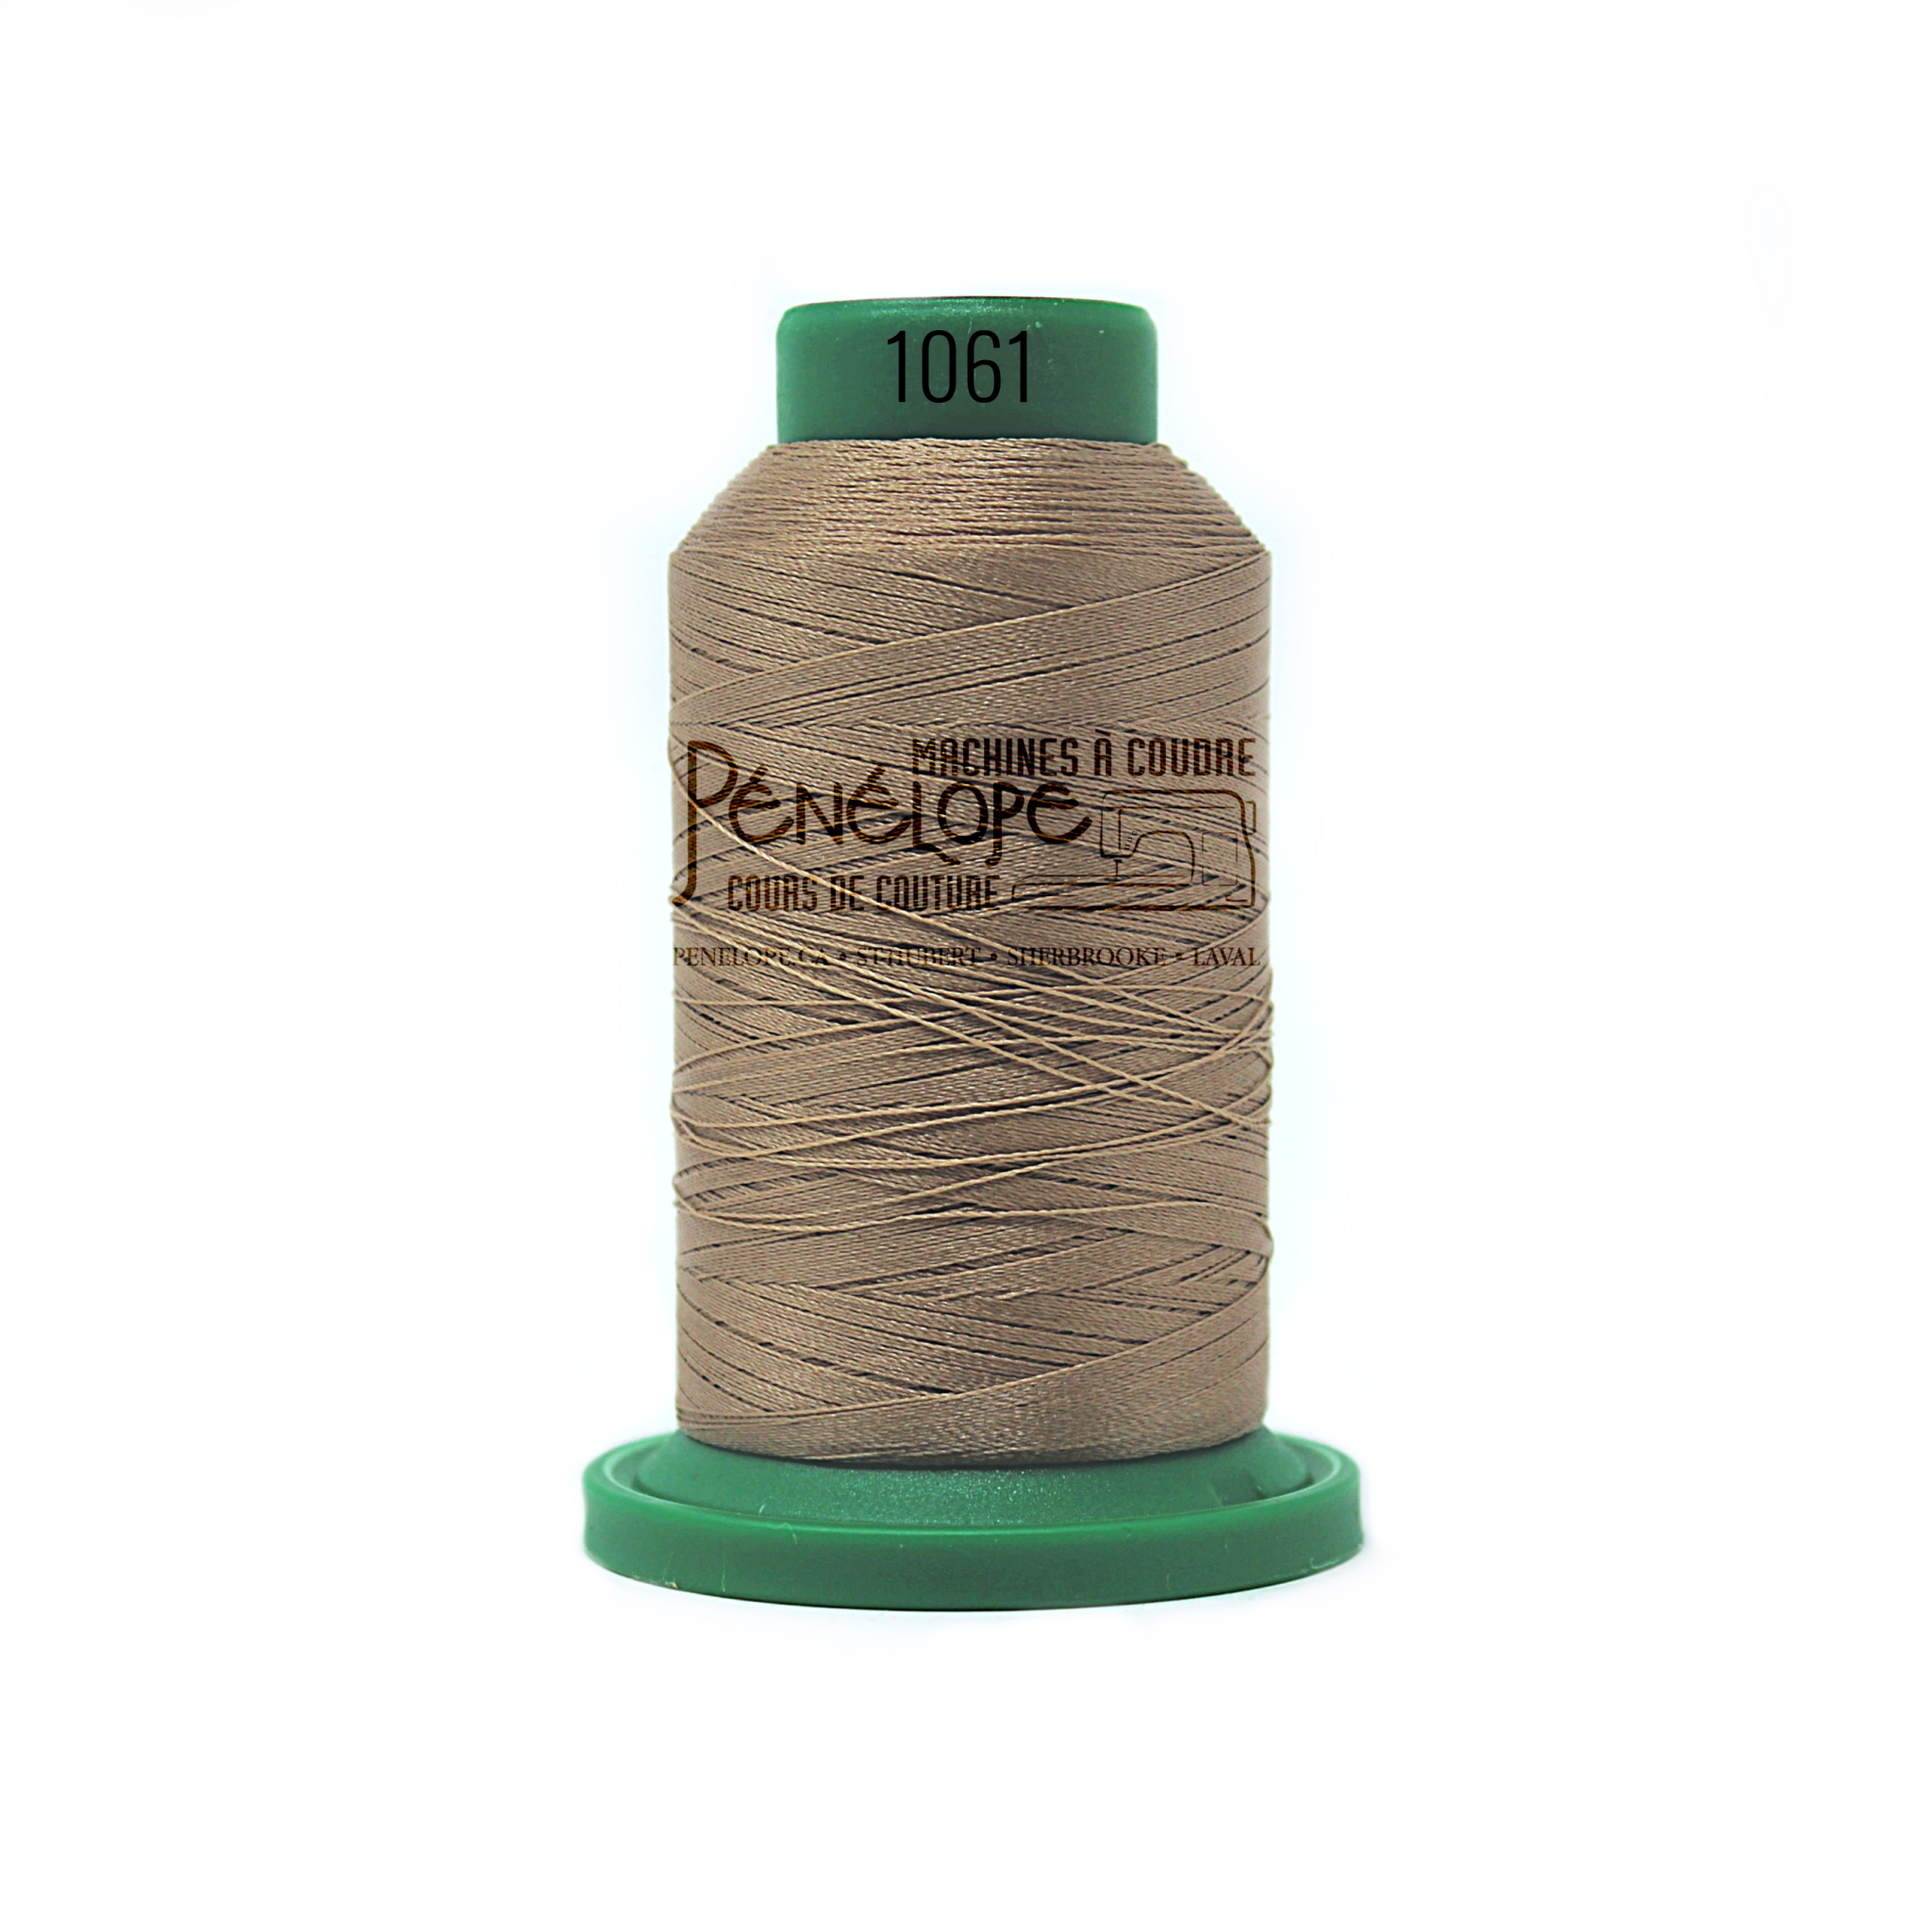 Isacord Isacord thread 1061 for embroidery and sewing